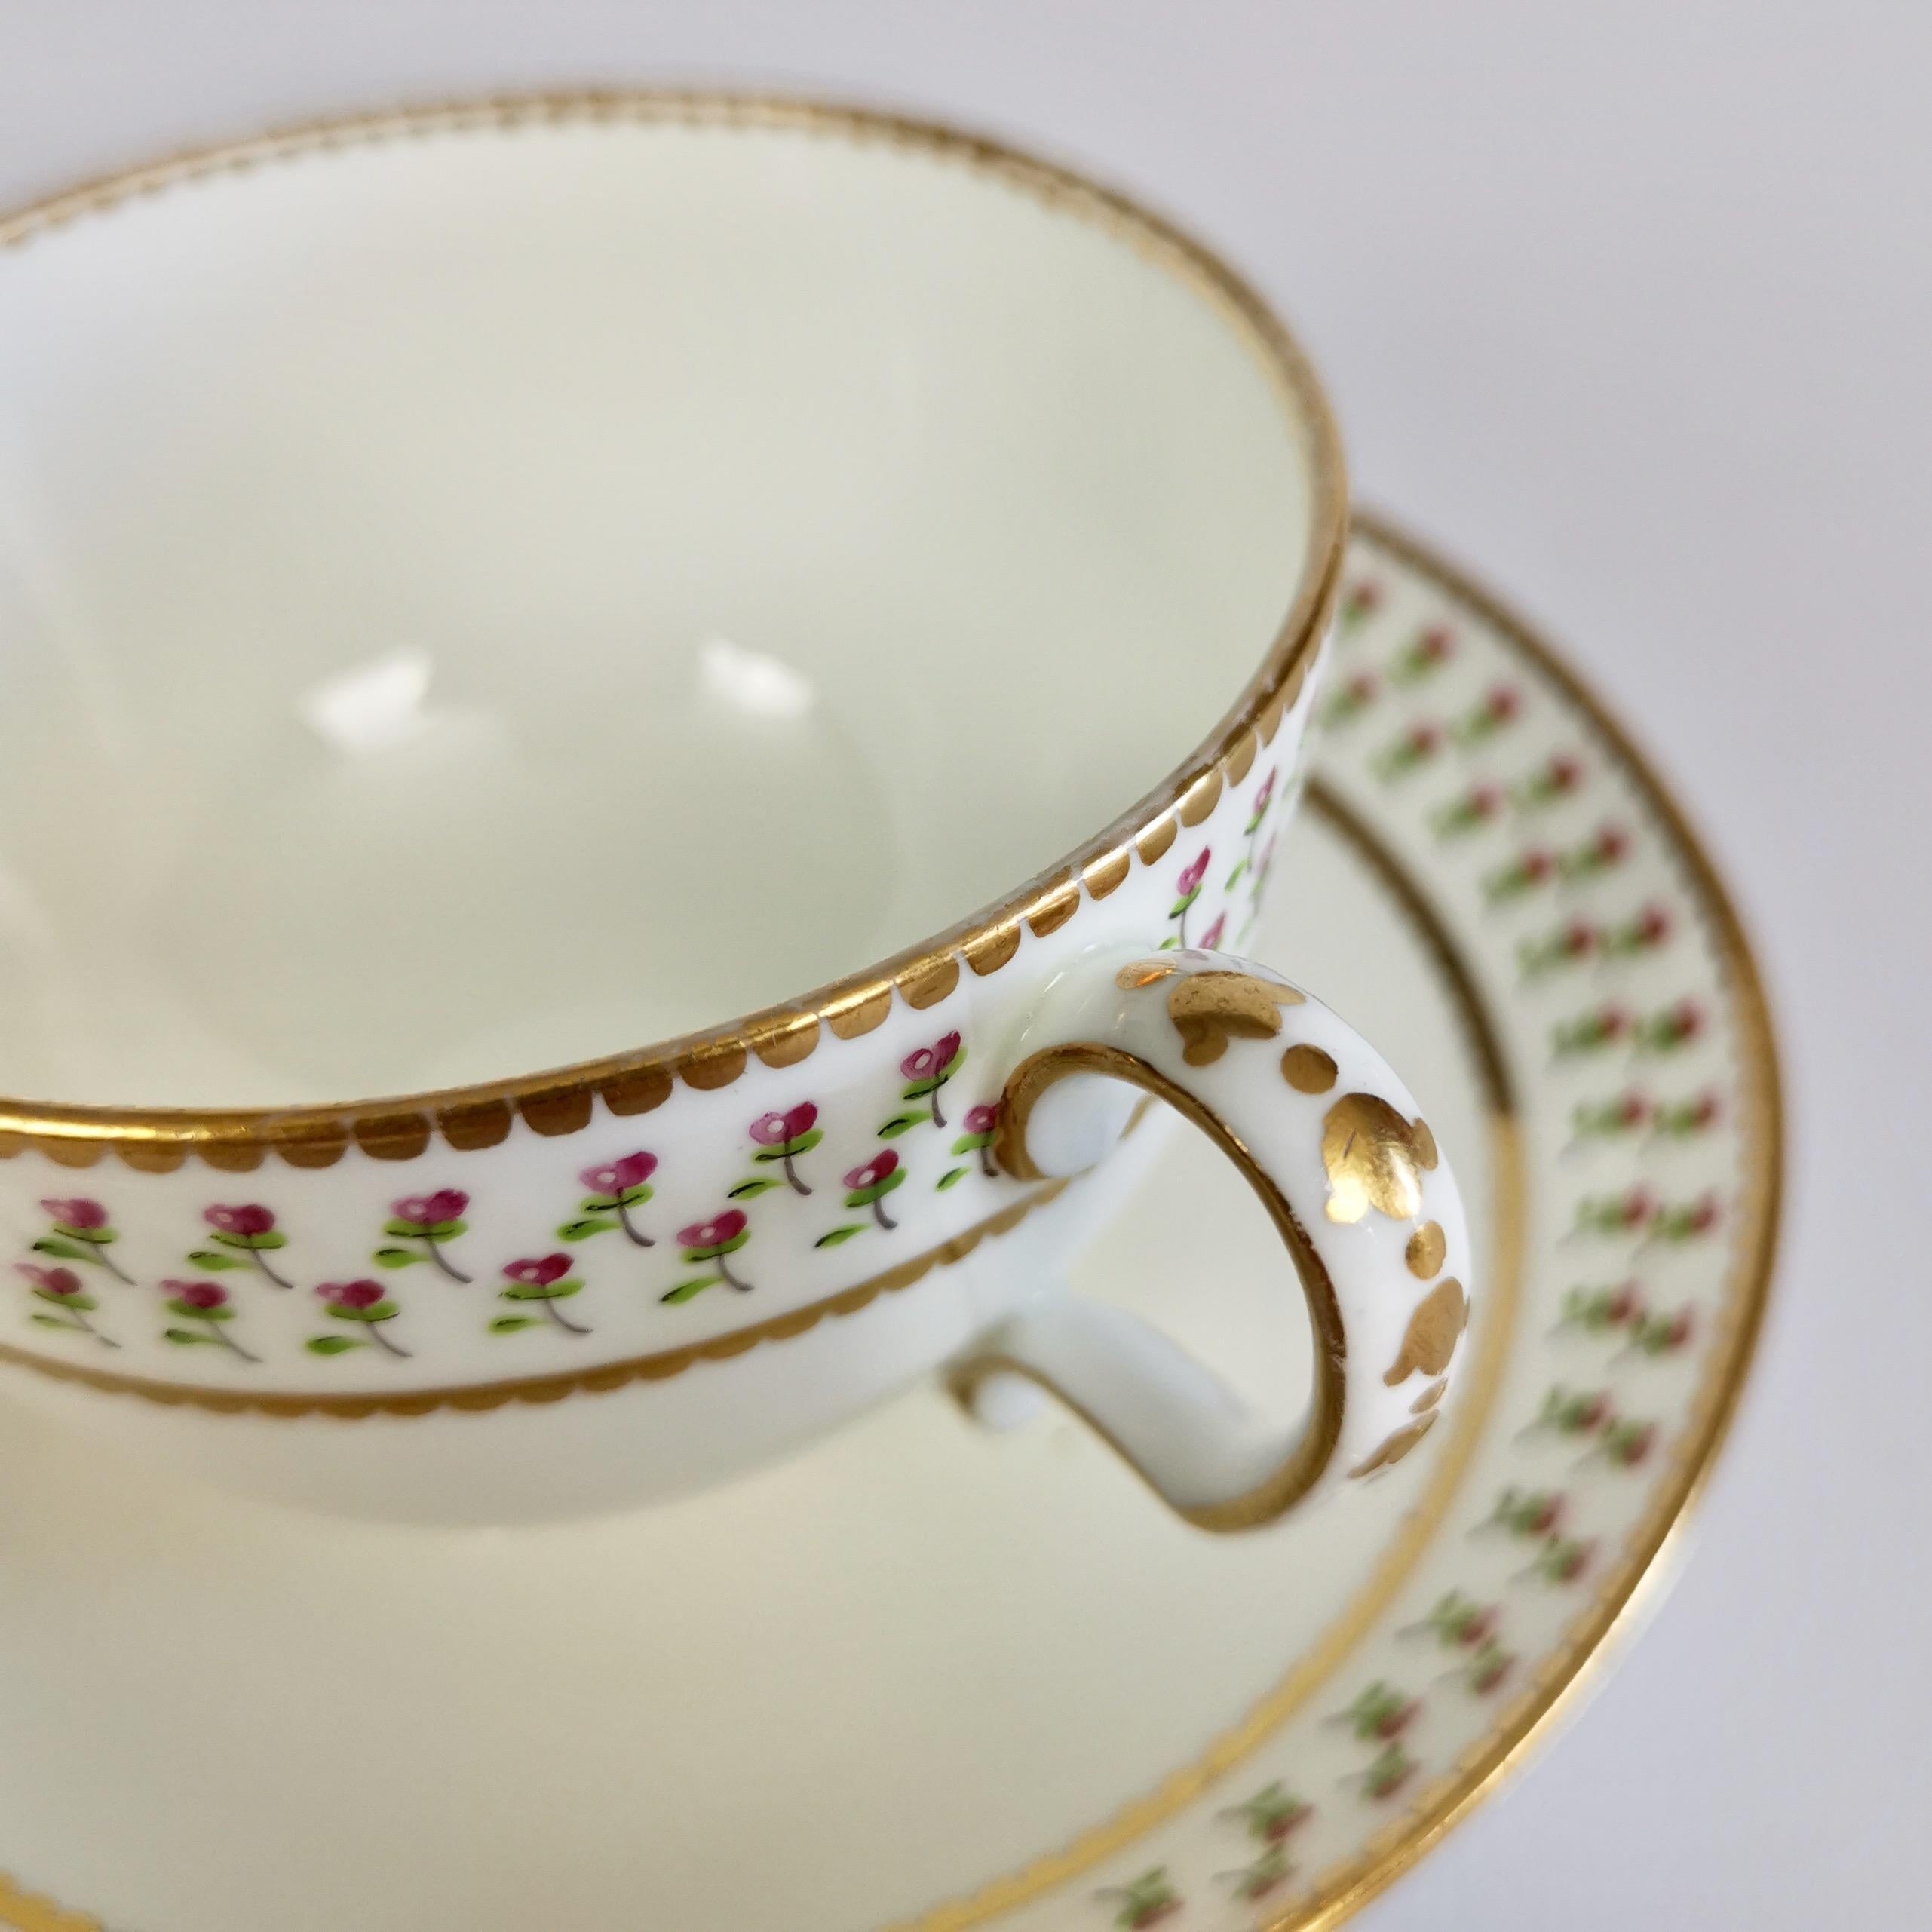 Derby King Street Porcelain Teacup Trio, White with Tiny Roses, 1848-1862 4